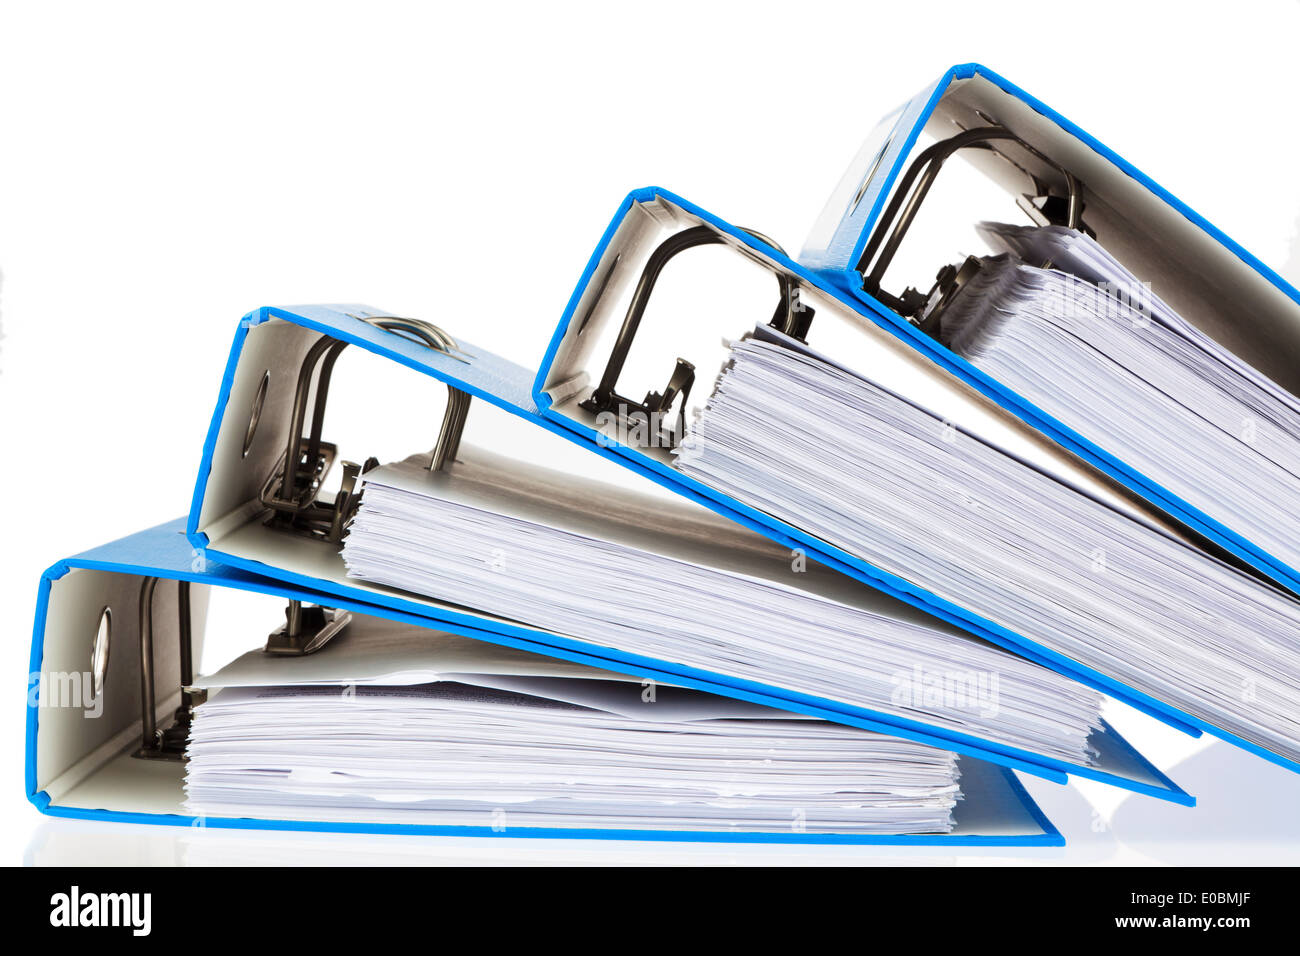 File with documents and documents. Safekeeping of contracts Stock Photo